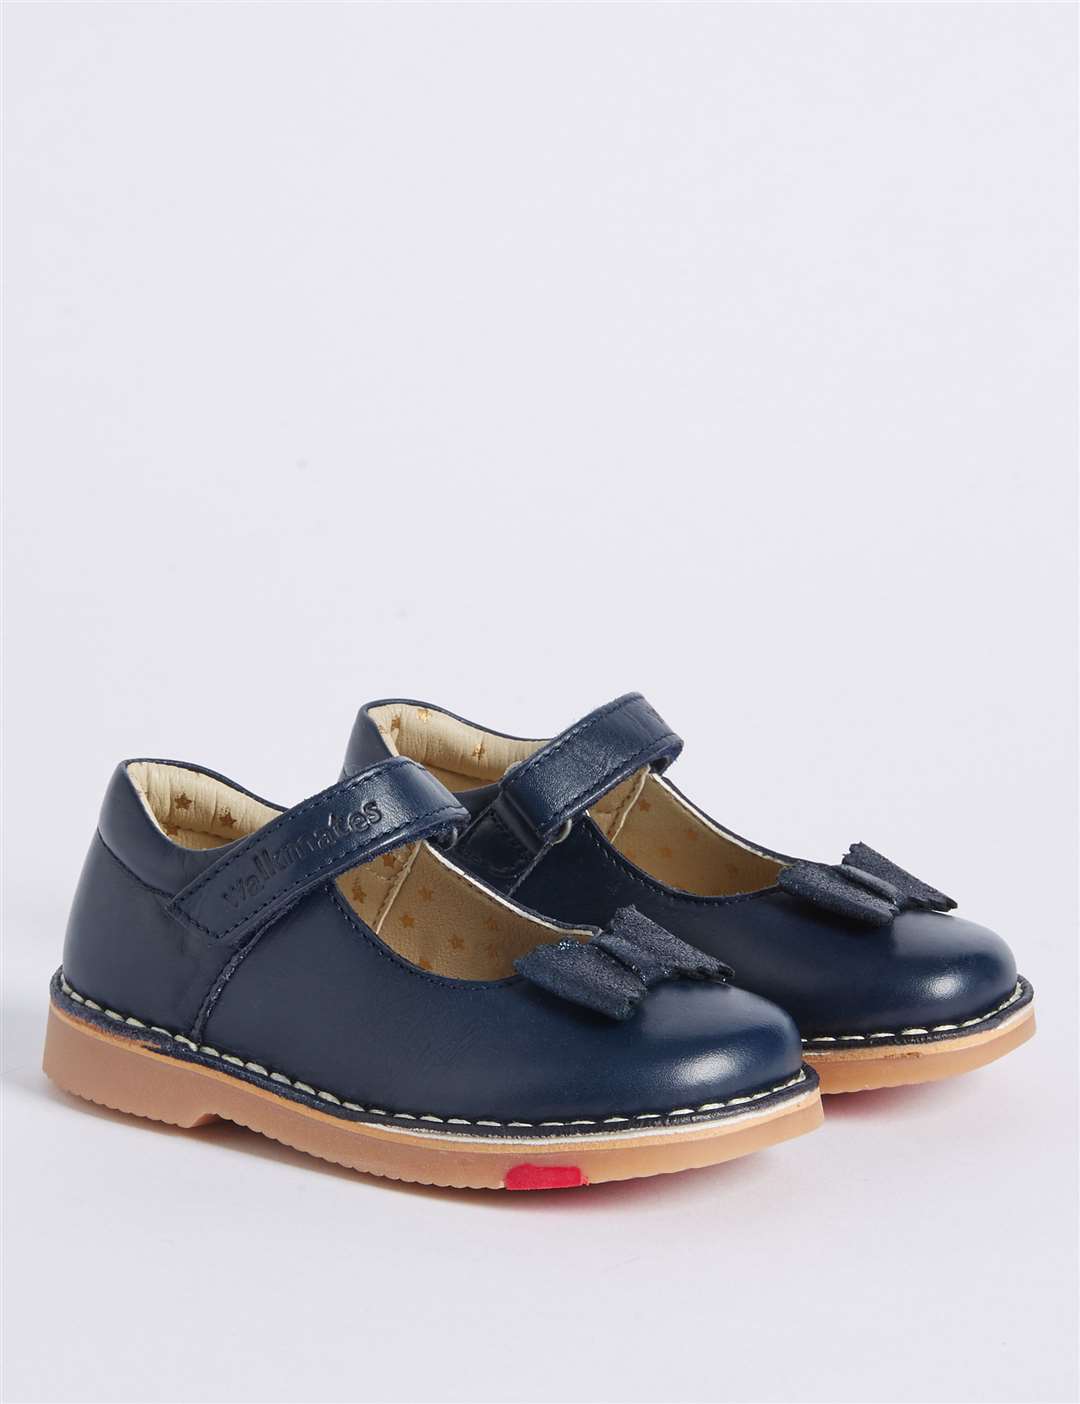 M&S Kids' Leather Walkmates Cross-bar Shoes, from £24